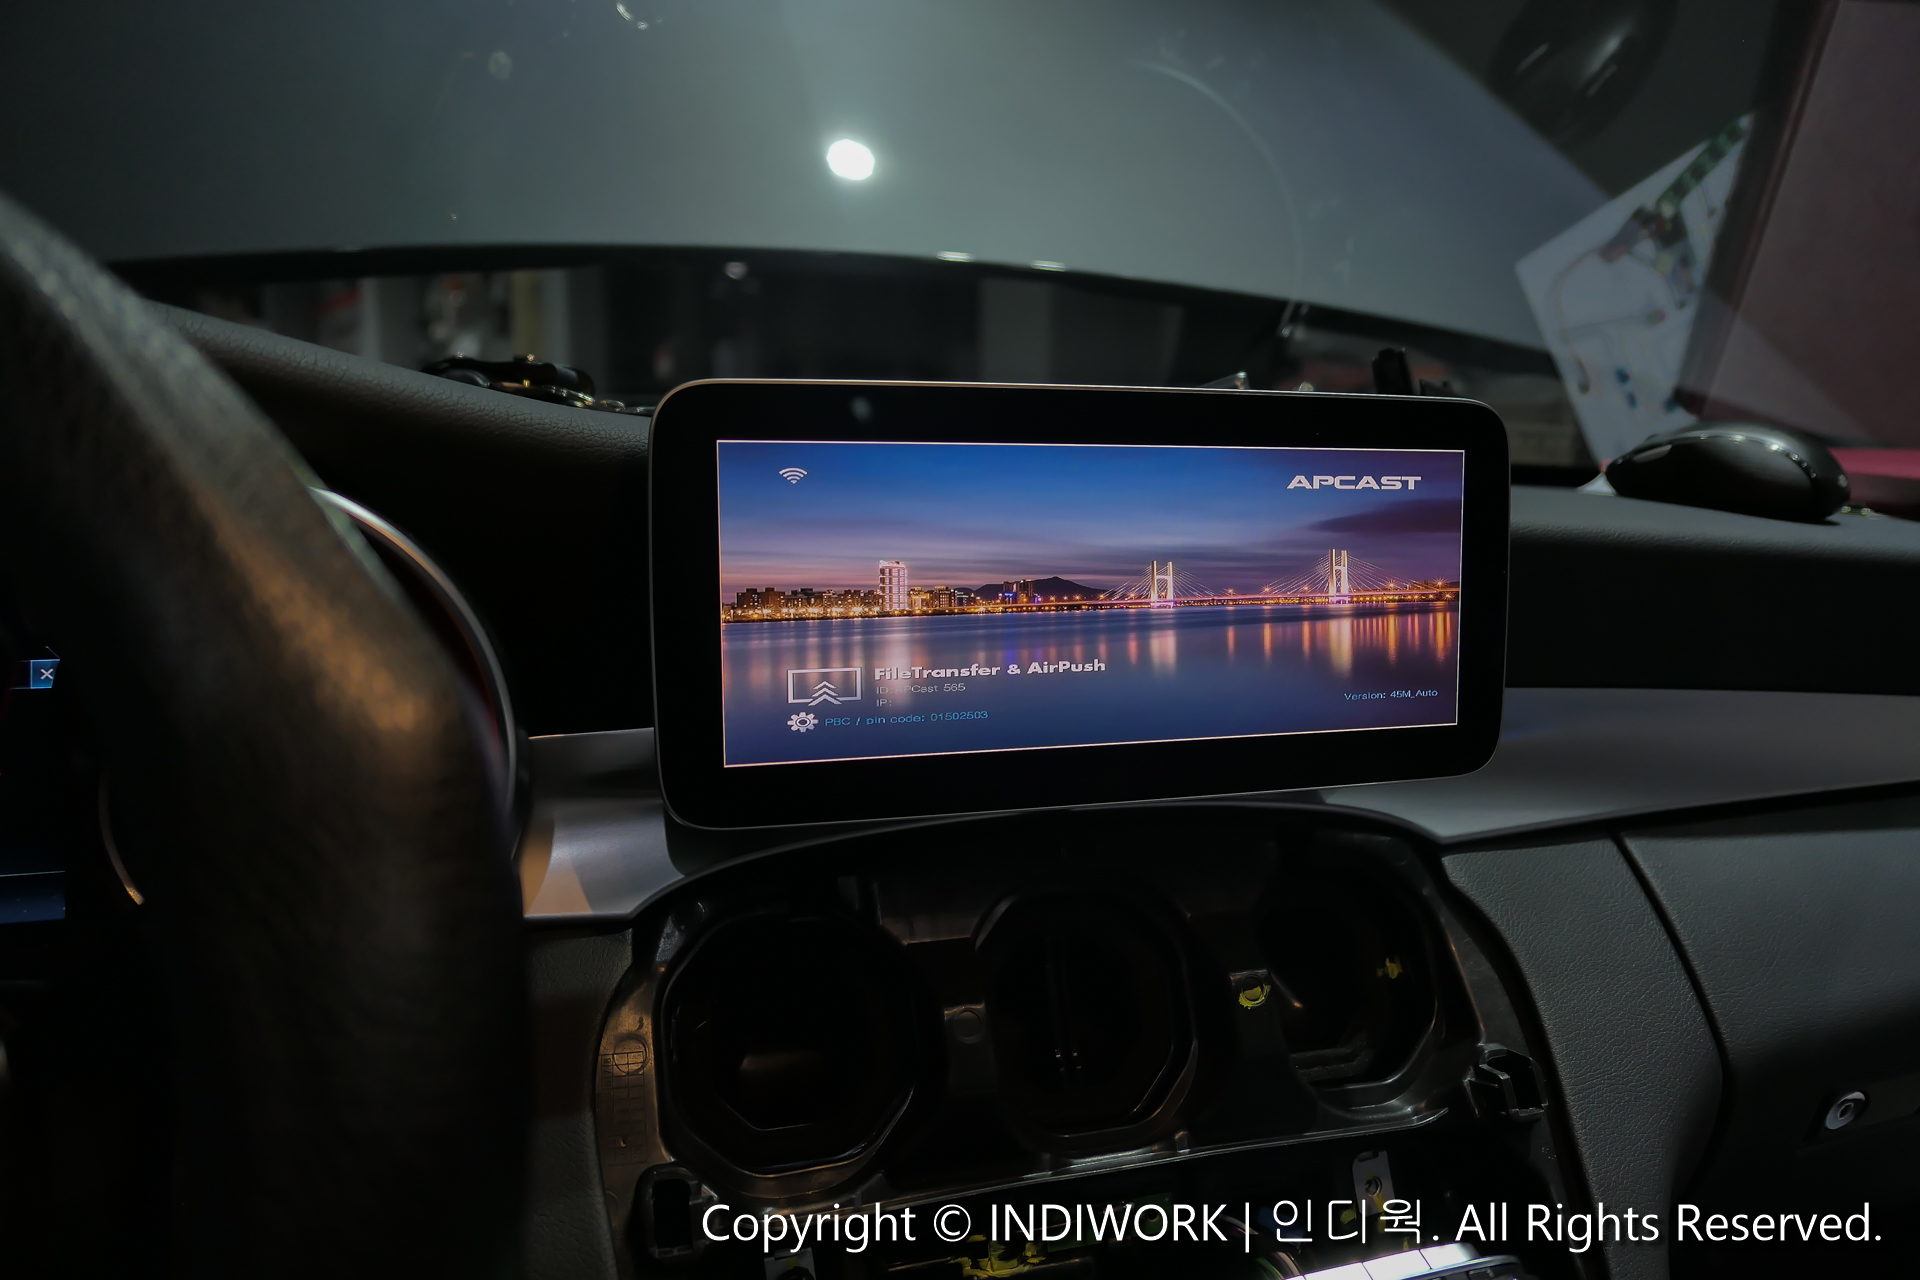 Android,Mirrong,GPS,Capacitive Touch system. for 2019 W205 facelift "HD-LINK(IW-NTG6-N23)”-APCAST